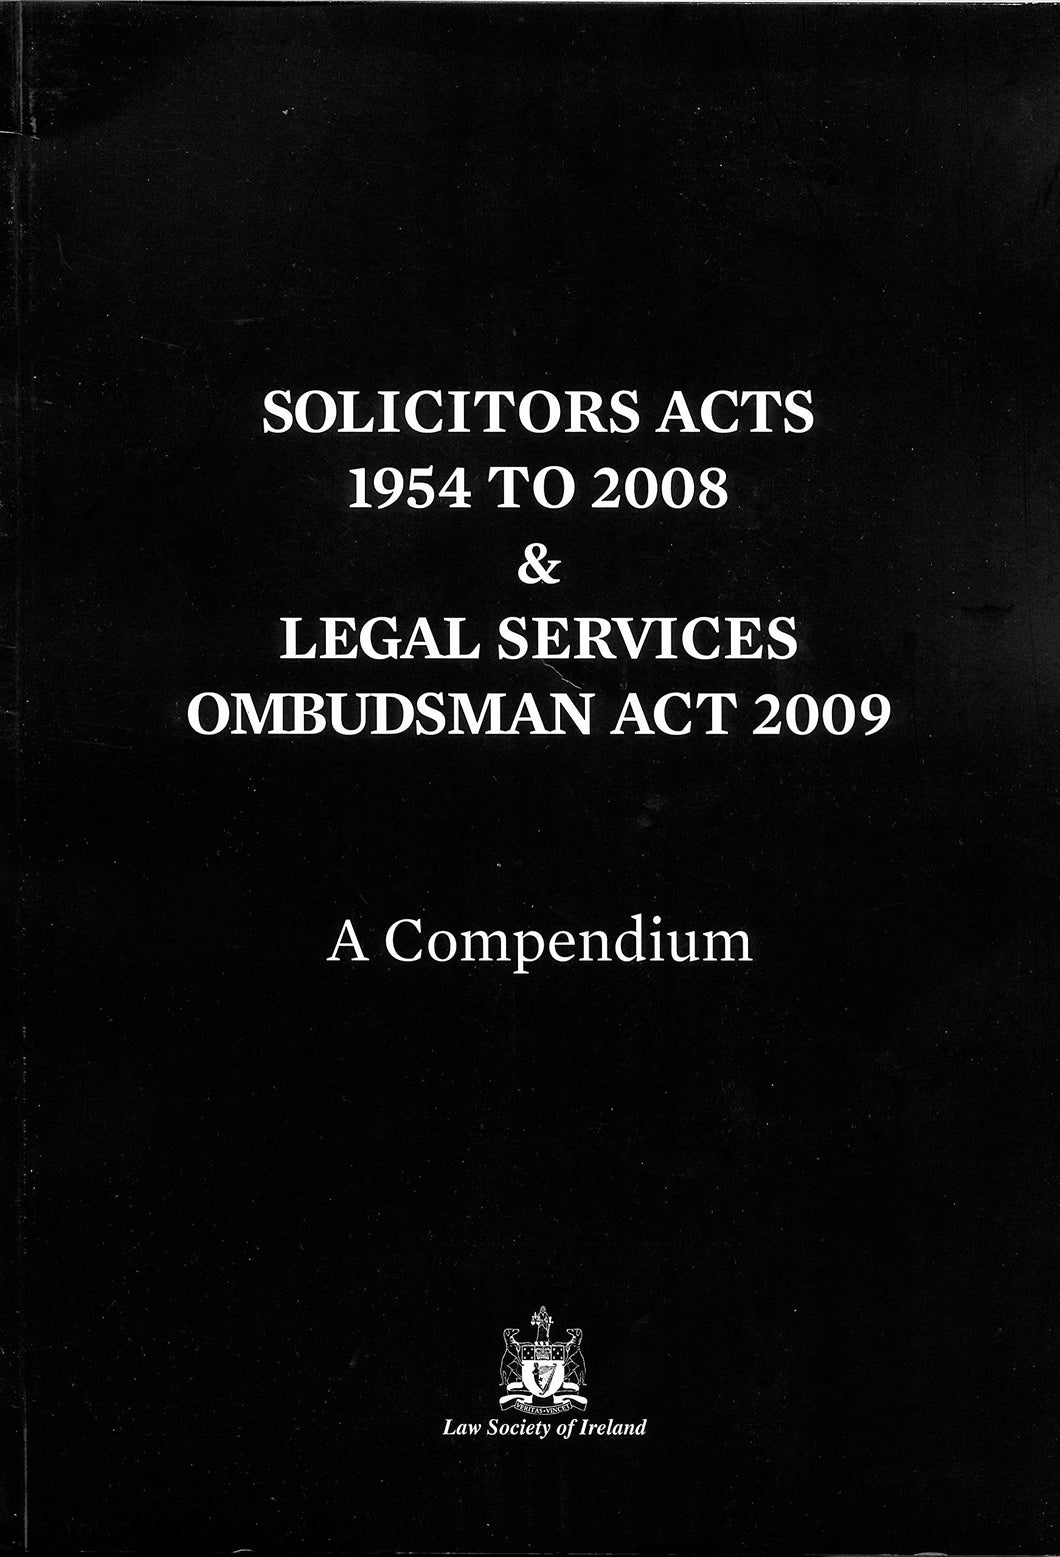 Solicitors Acts 1954 to 2008 and Legal Services Ombudsman Act 2009: A Compendium